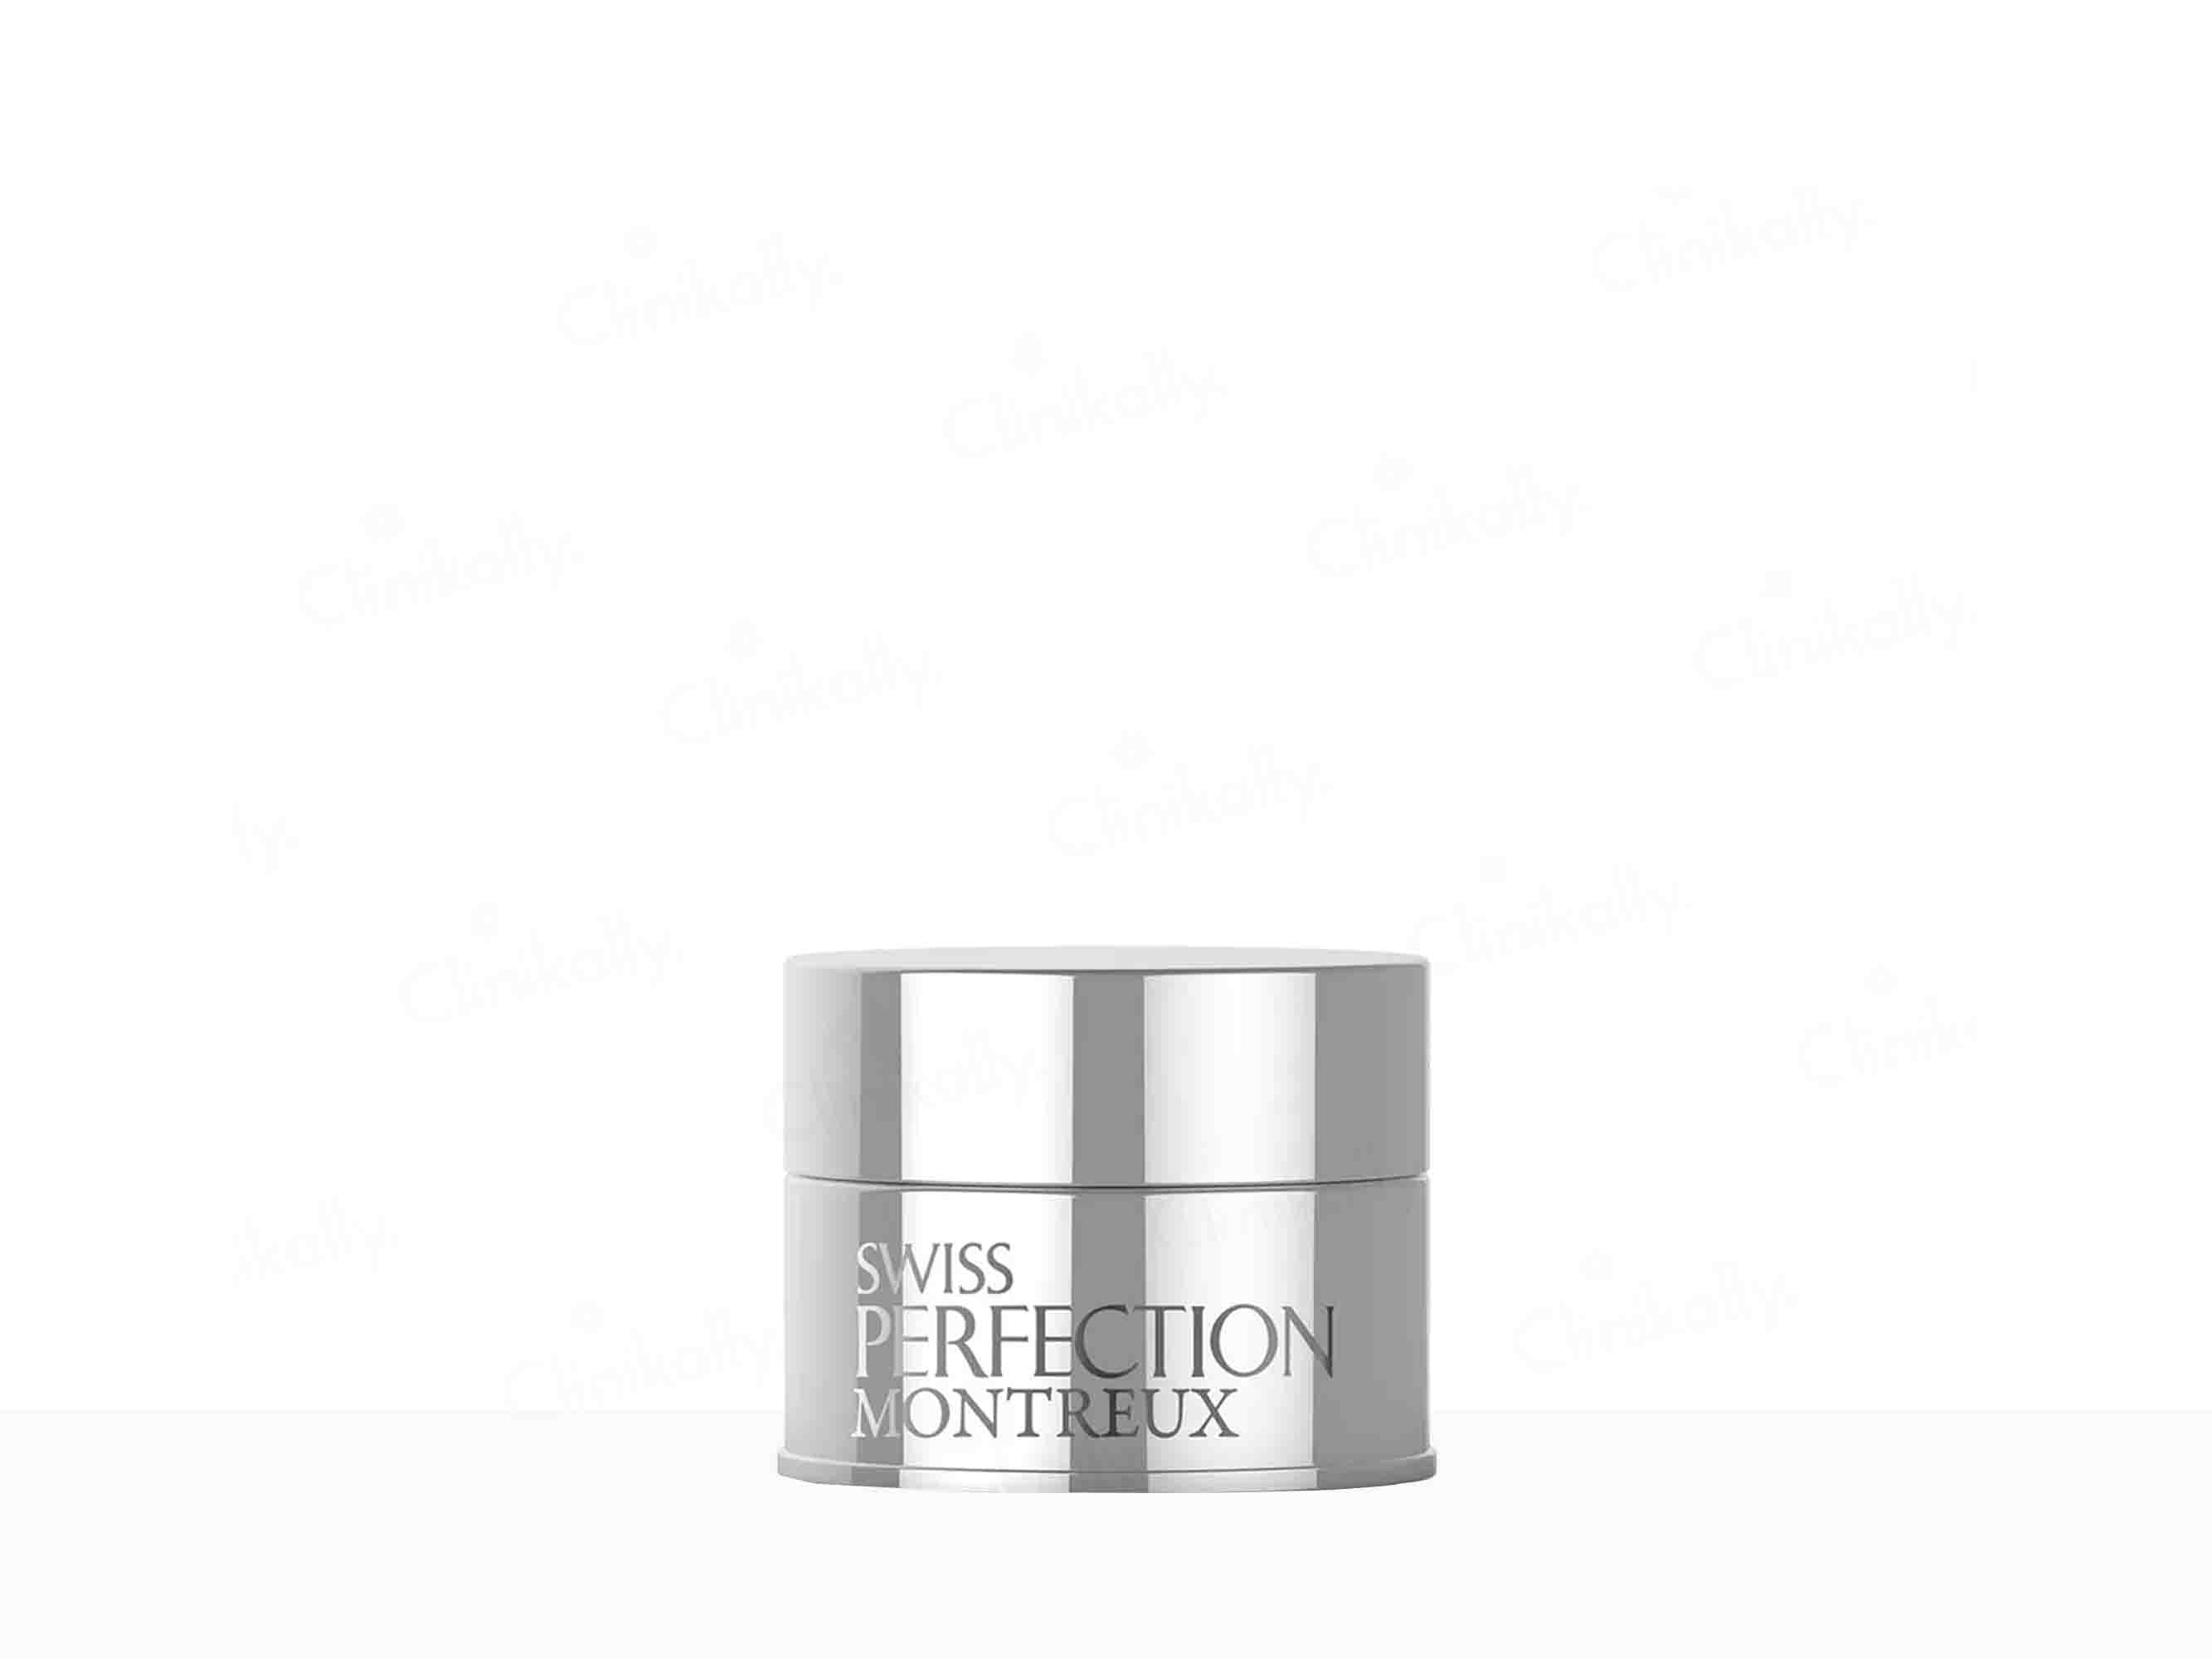 Swiss Perfection Montreux Cellular Perfect Lift Eye Cream